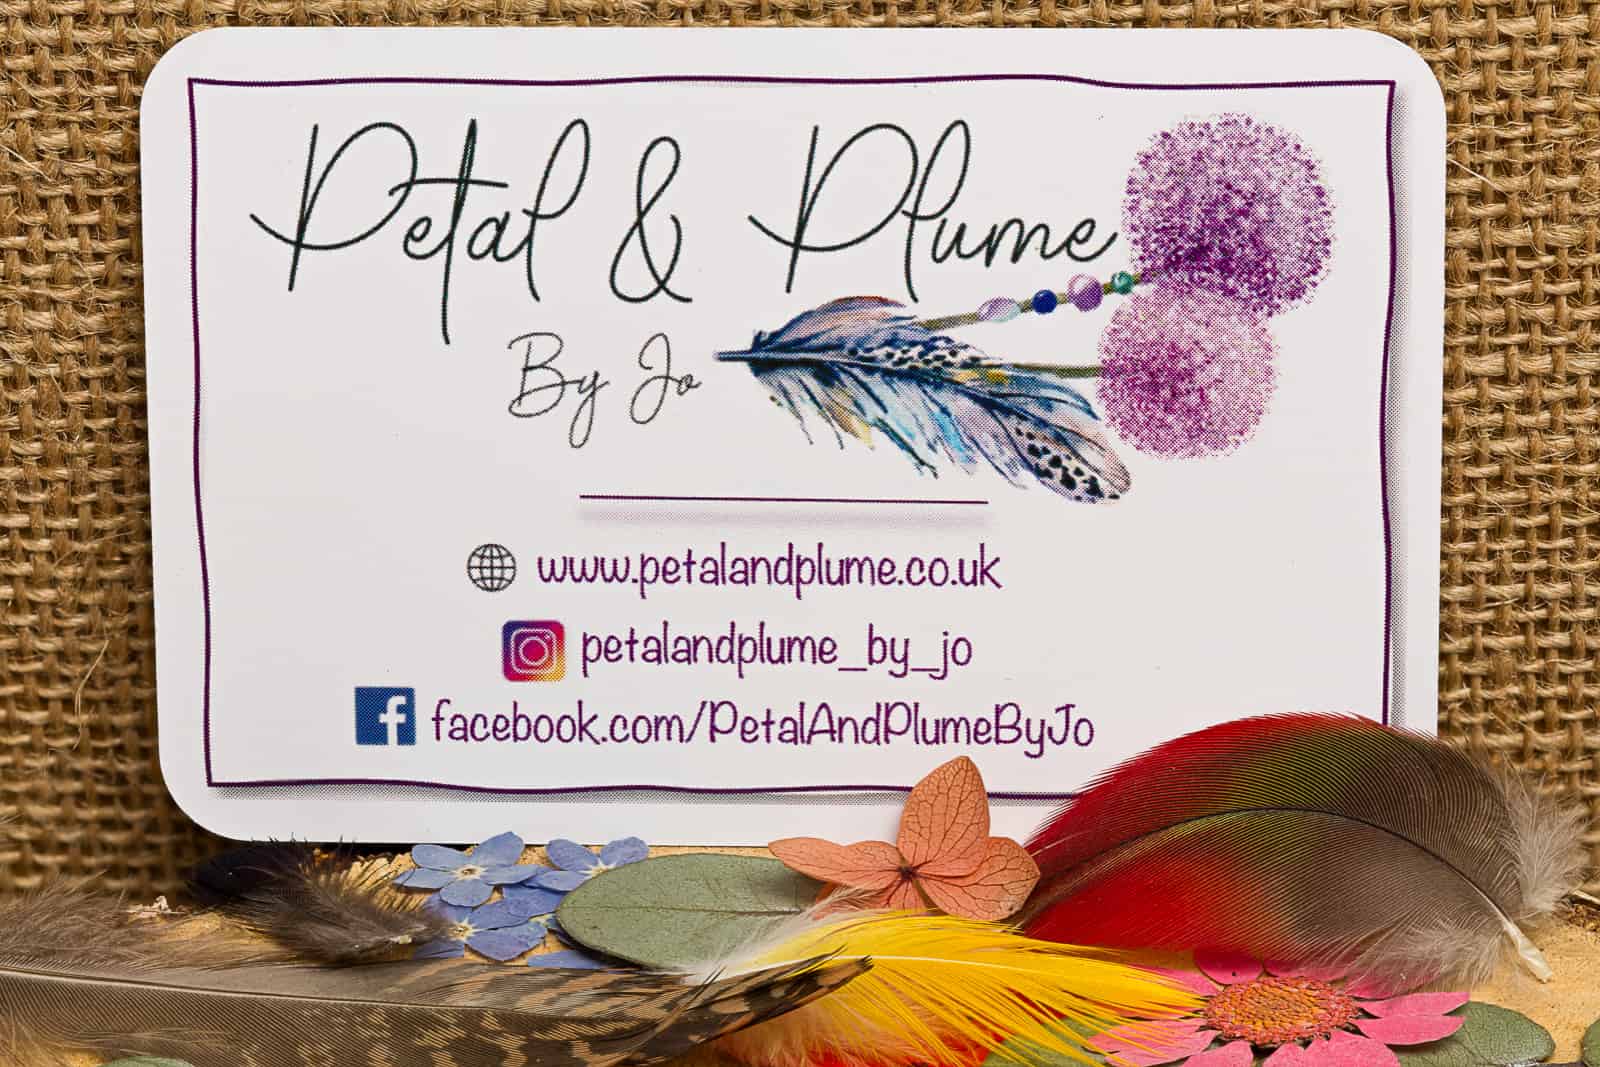 Petal and plume business card